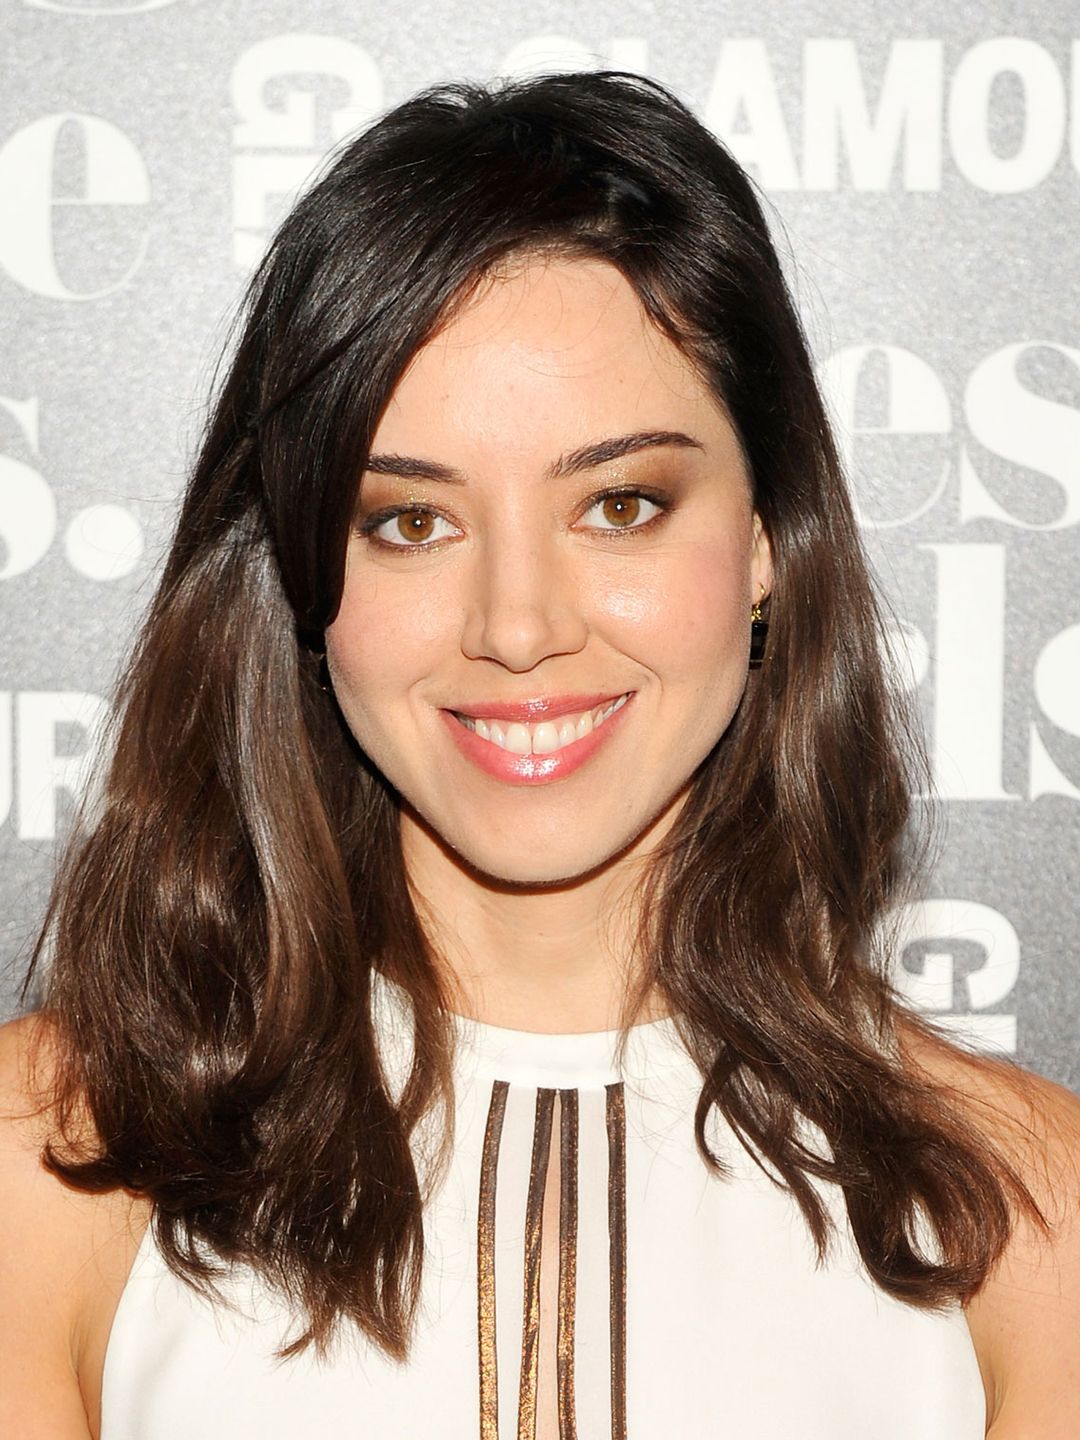 Aubrey Plaza who is her father